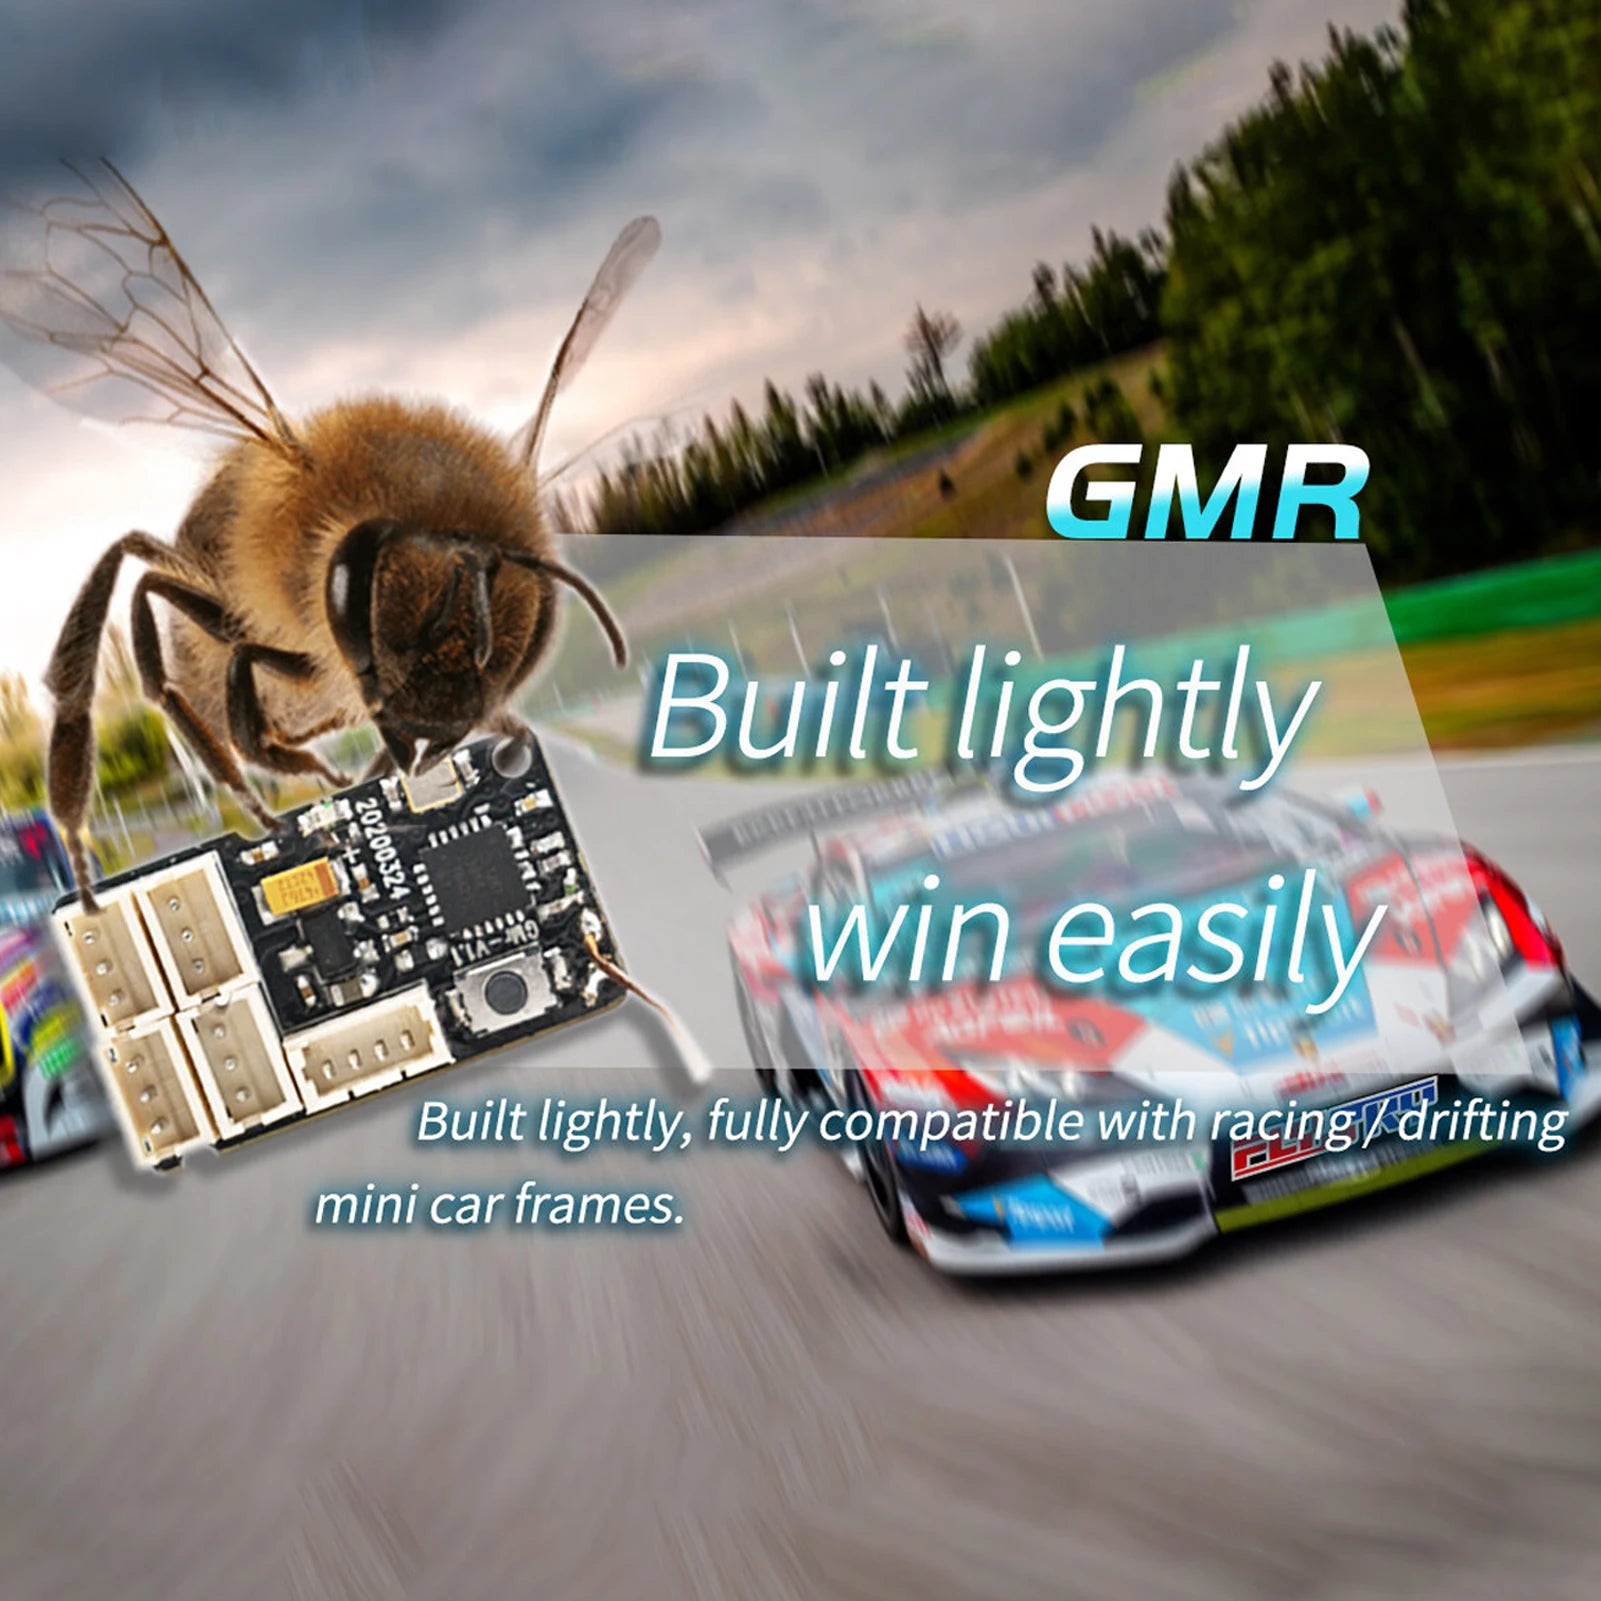 FLYSKY GMR 2.4GHz 4CH Receiver, GMR Built lightly win easily Built lightly, fully compatible with racing/ drifting mini car frames